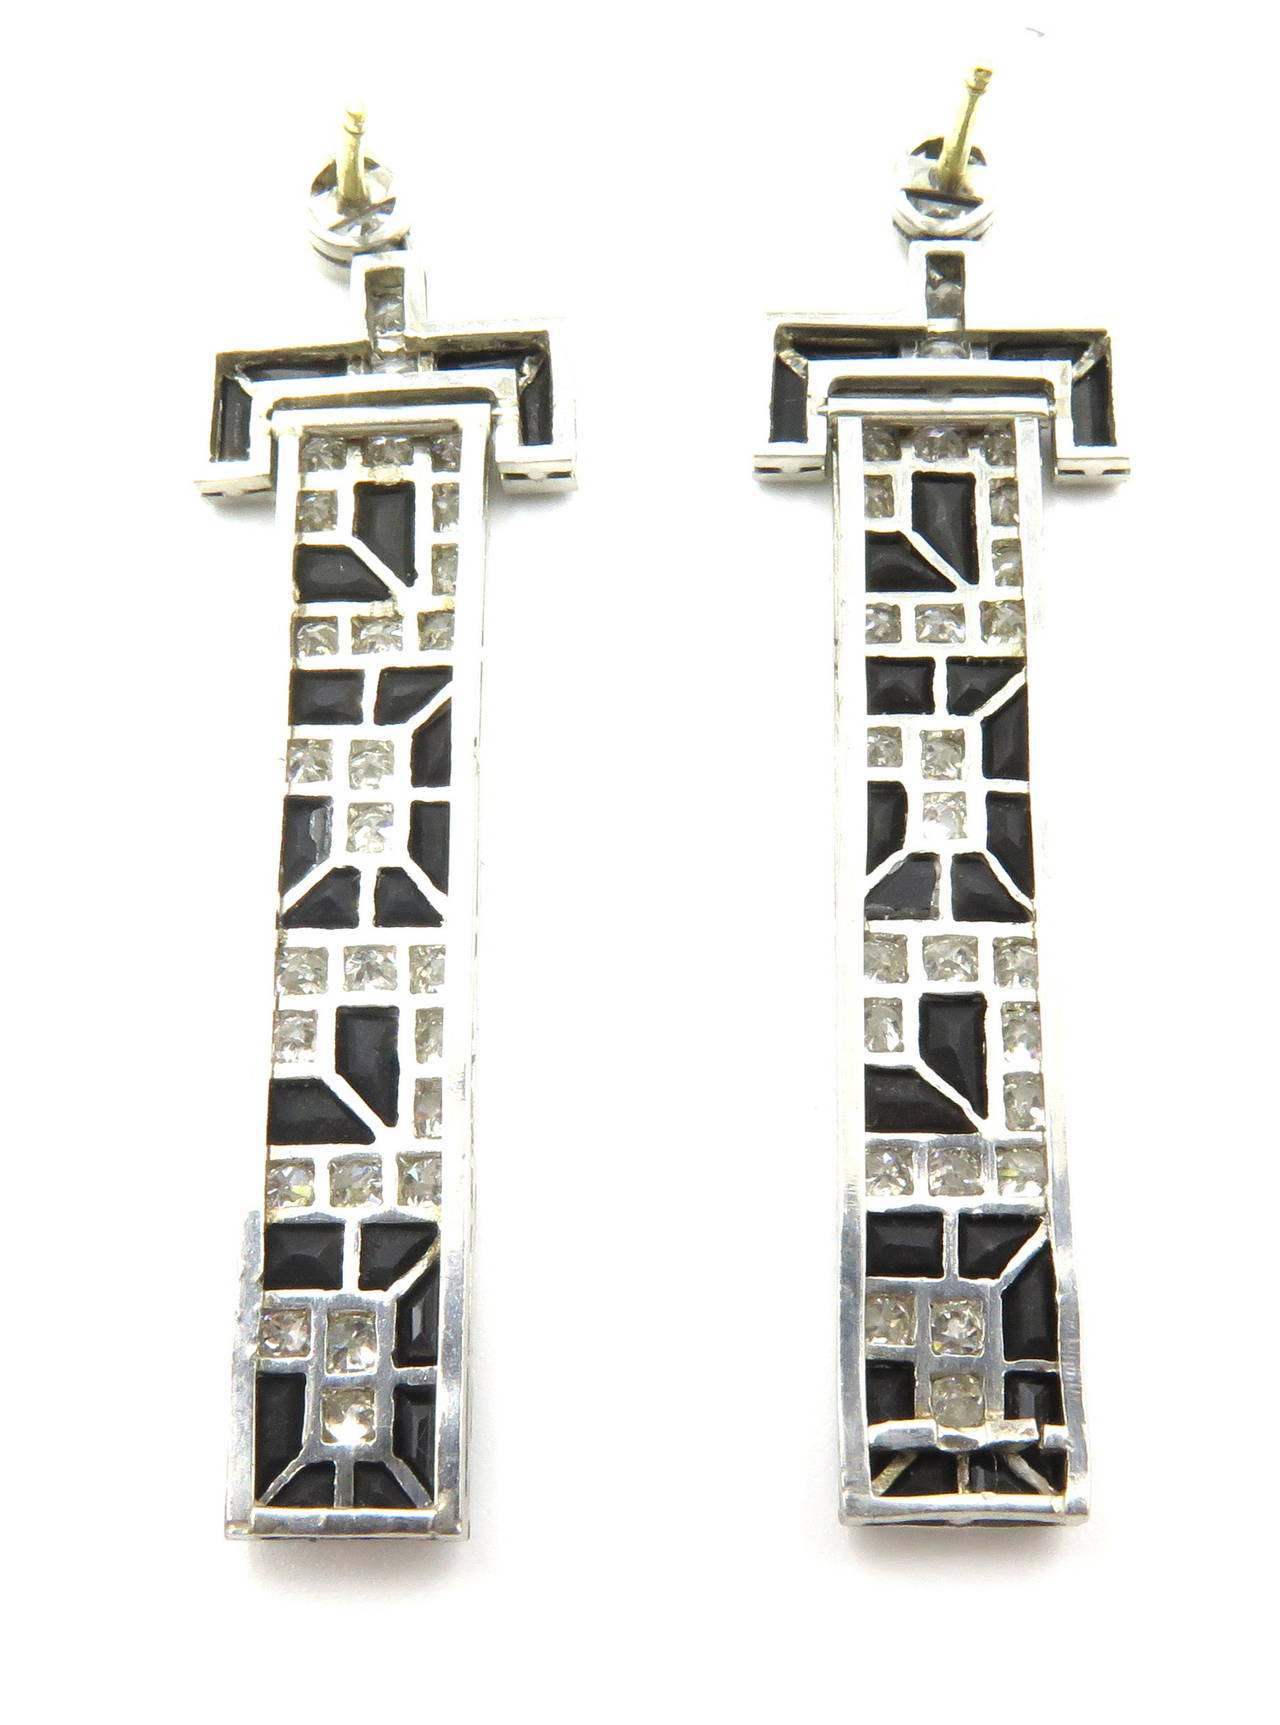 These very well articulated earrings have a somewhat modified Greek Key design. The top portion of the earring can fold back for flexibility. These post earrings are 1 3/4